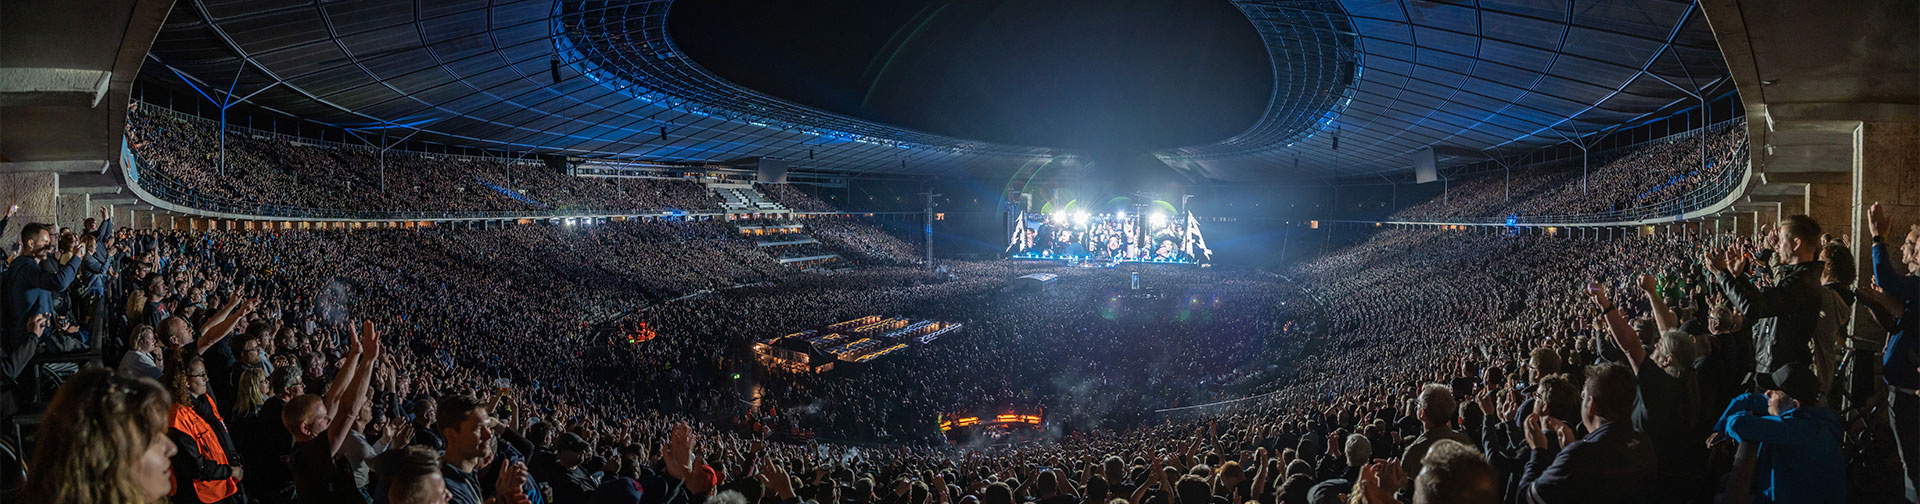 Metallica At Olympiastadion In Berlin Germany On July 6